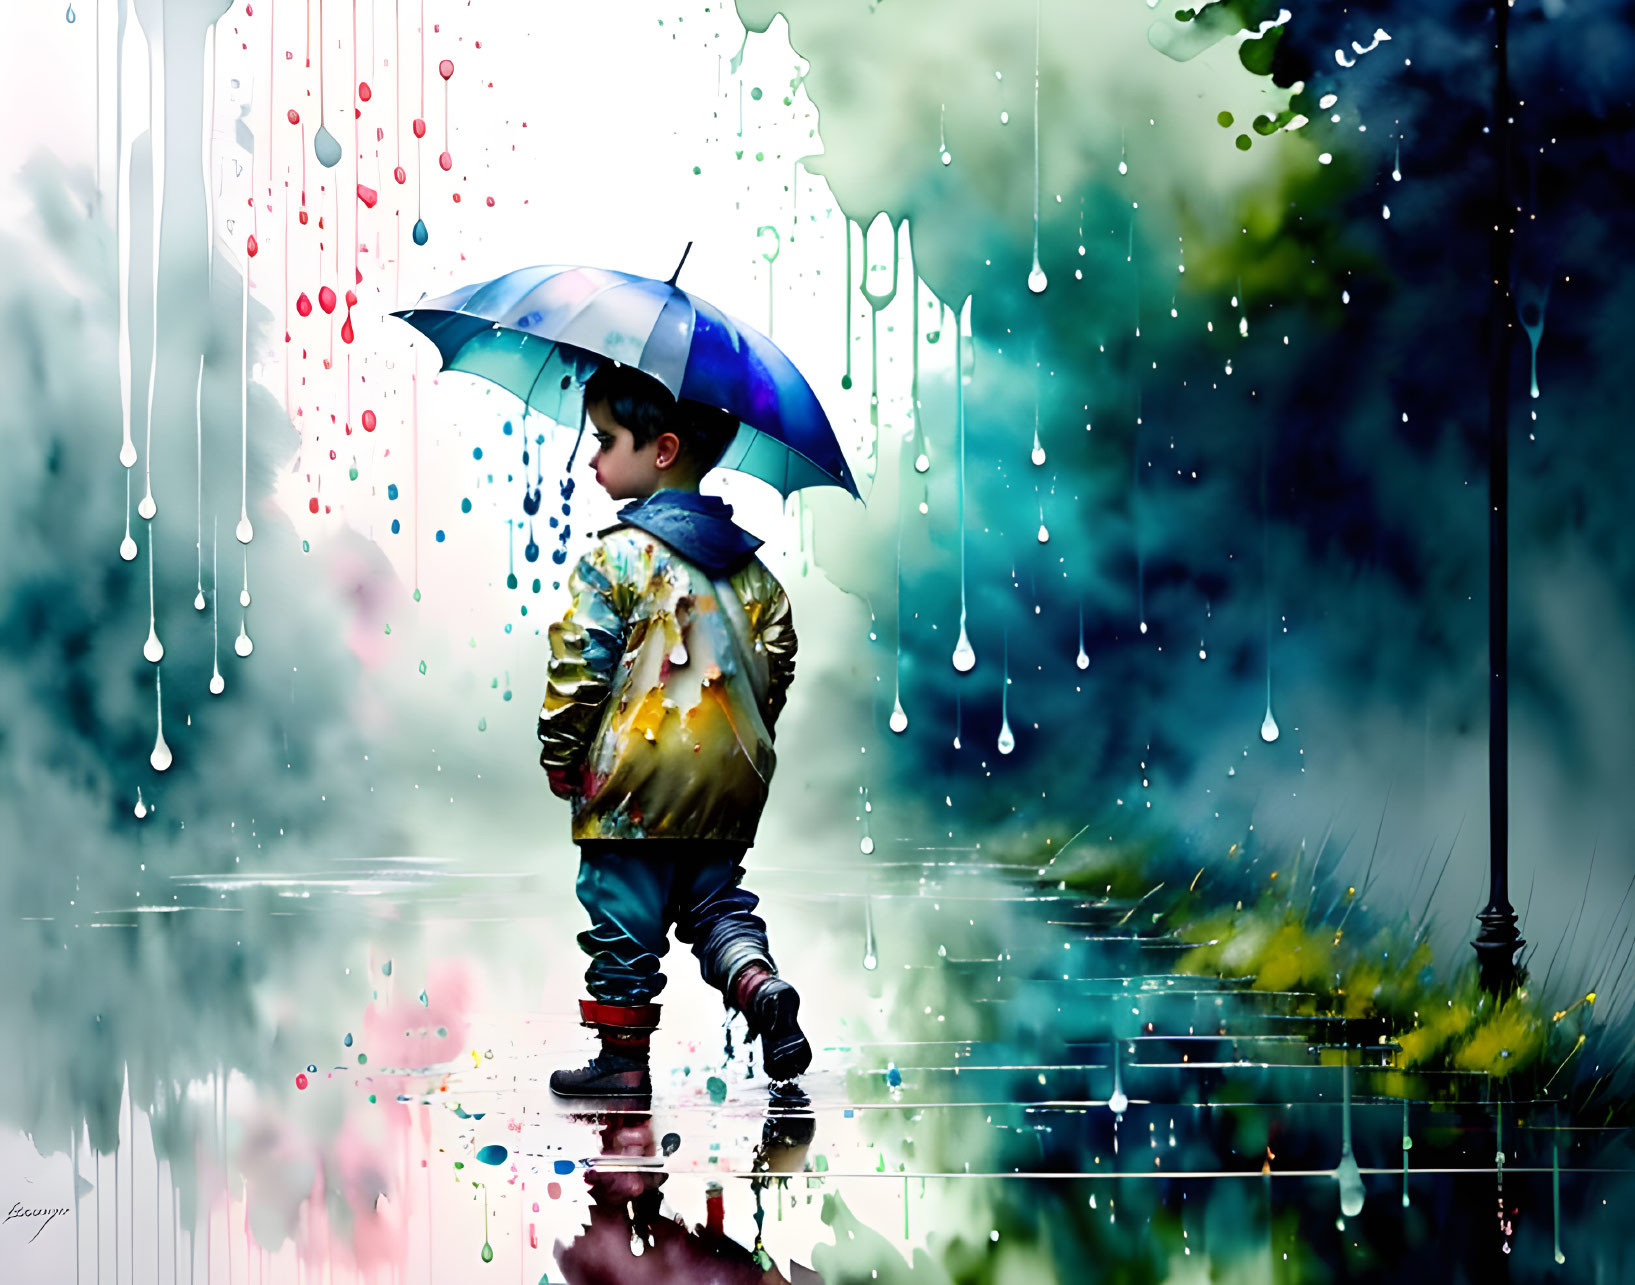 Child under blue-striped umbrella on wet surface with colorful lights and raindrops, streetlamp in background